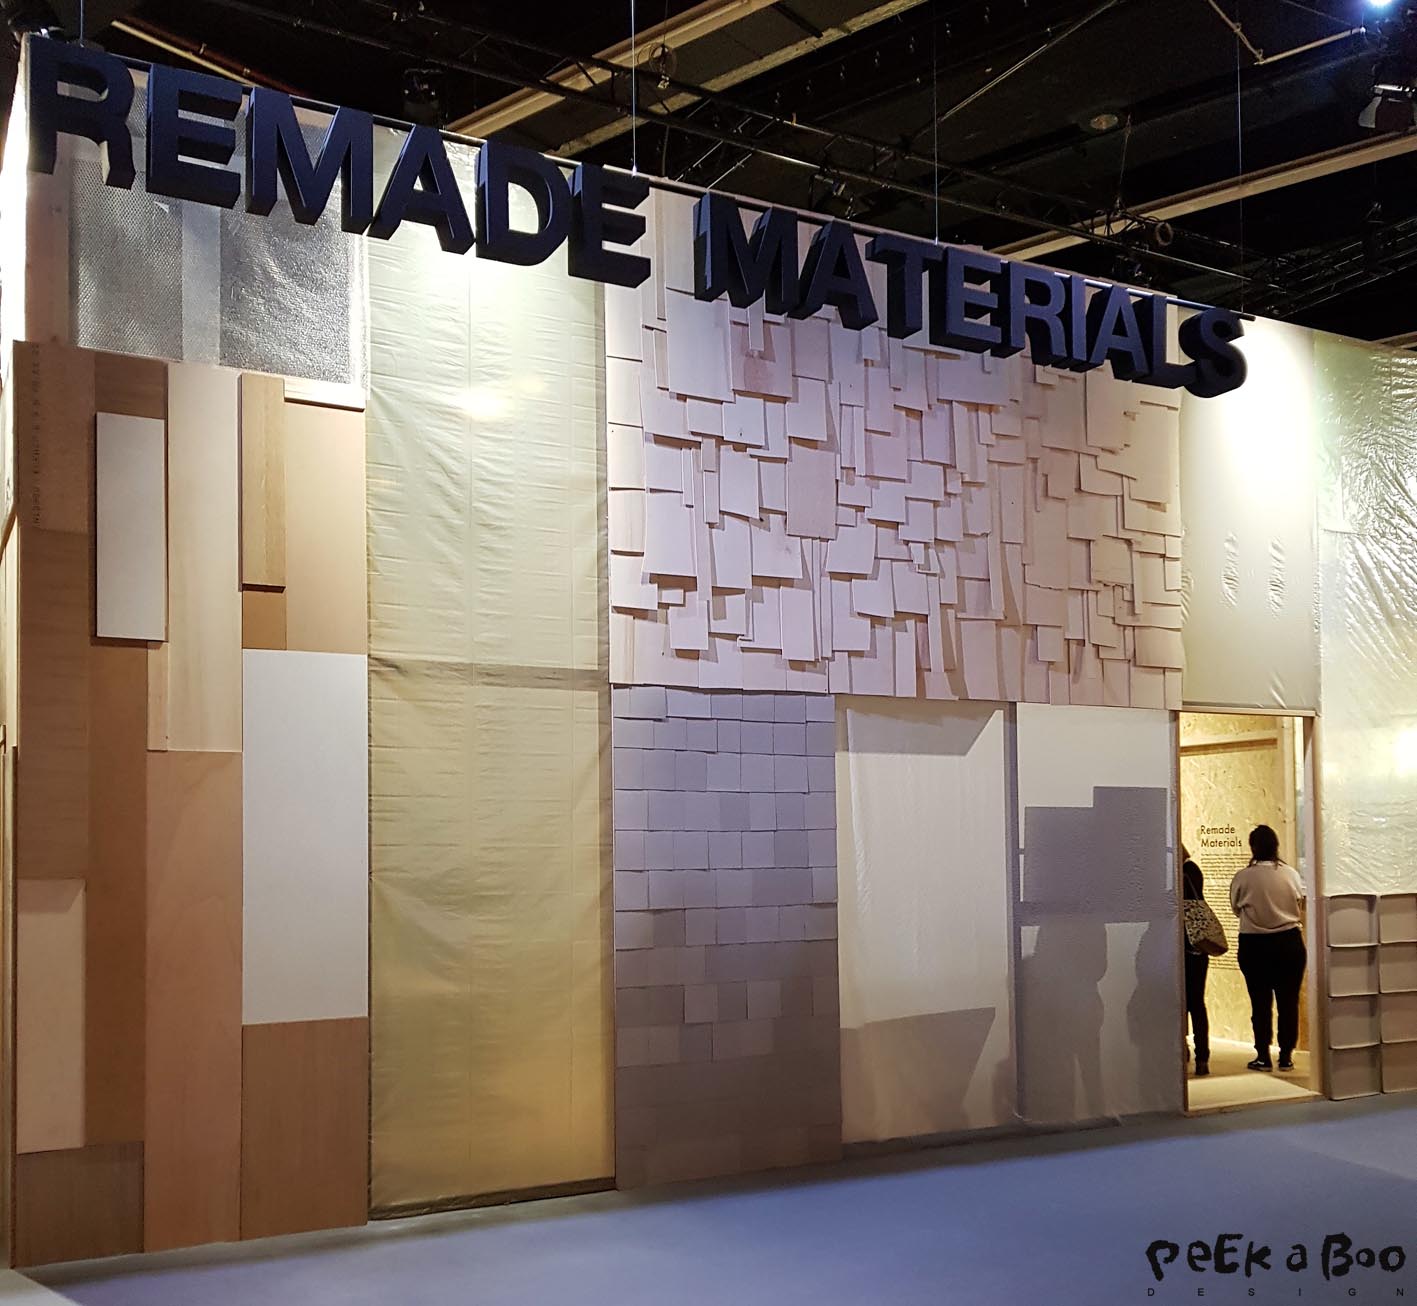 All kind of remade materials are beeing developed to stop the huge amount of waste.